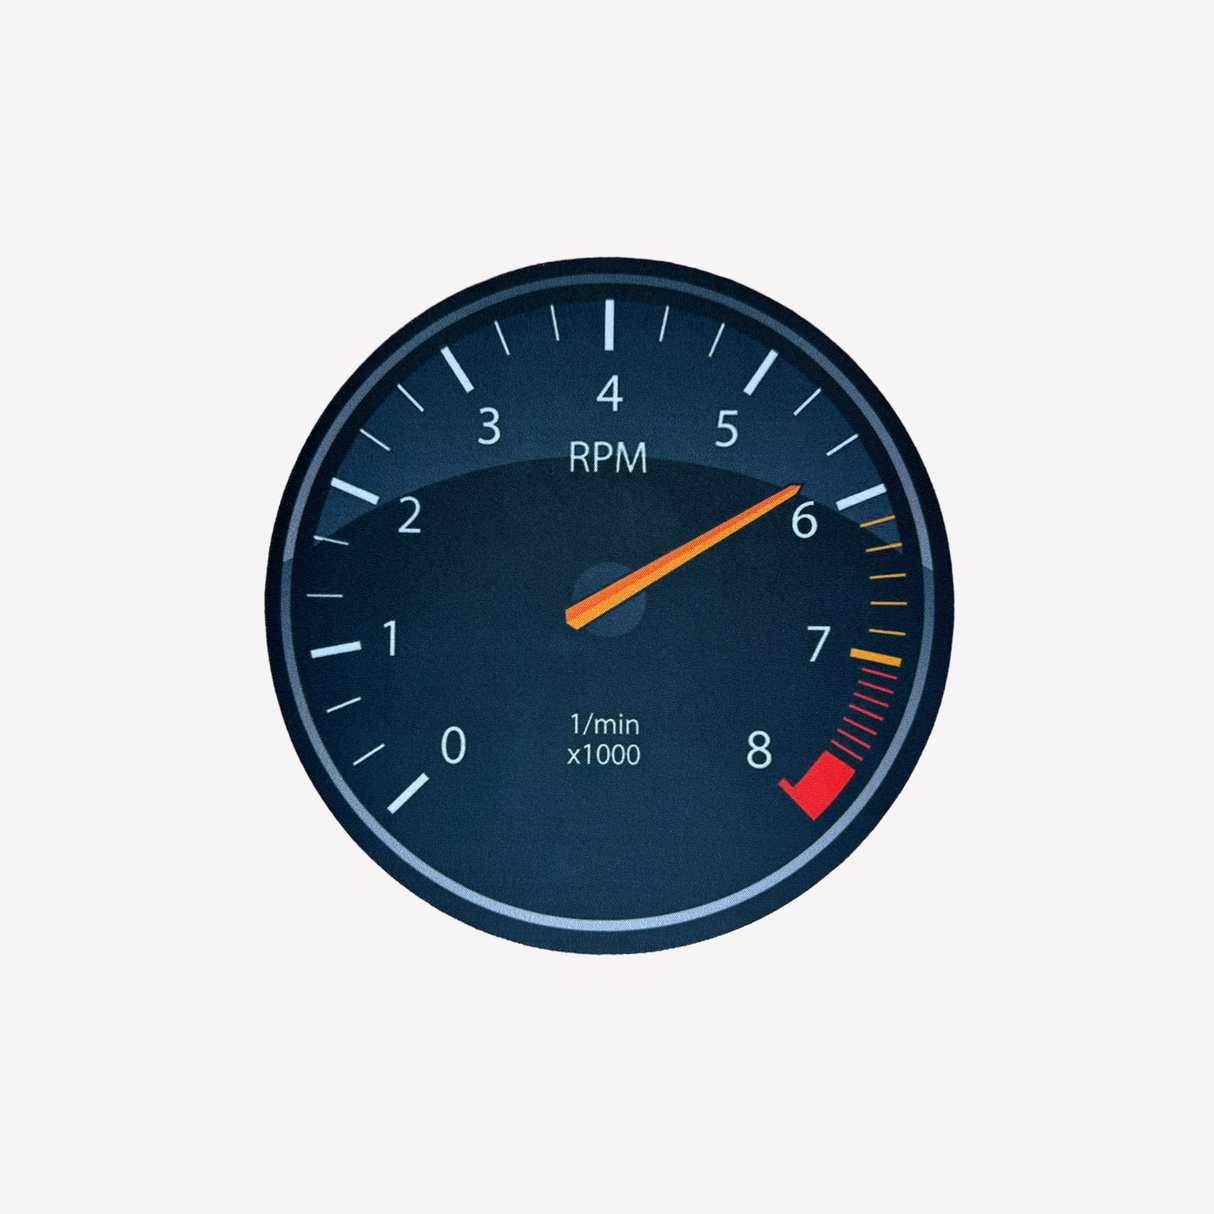 Tachometer RPM Mouse Pad Car Lover Gift Present